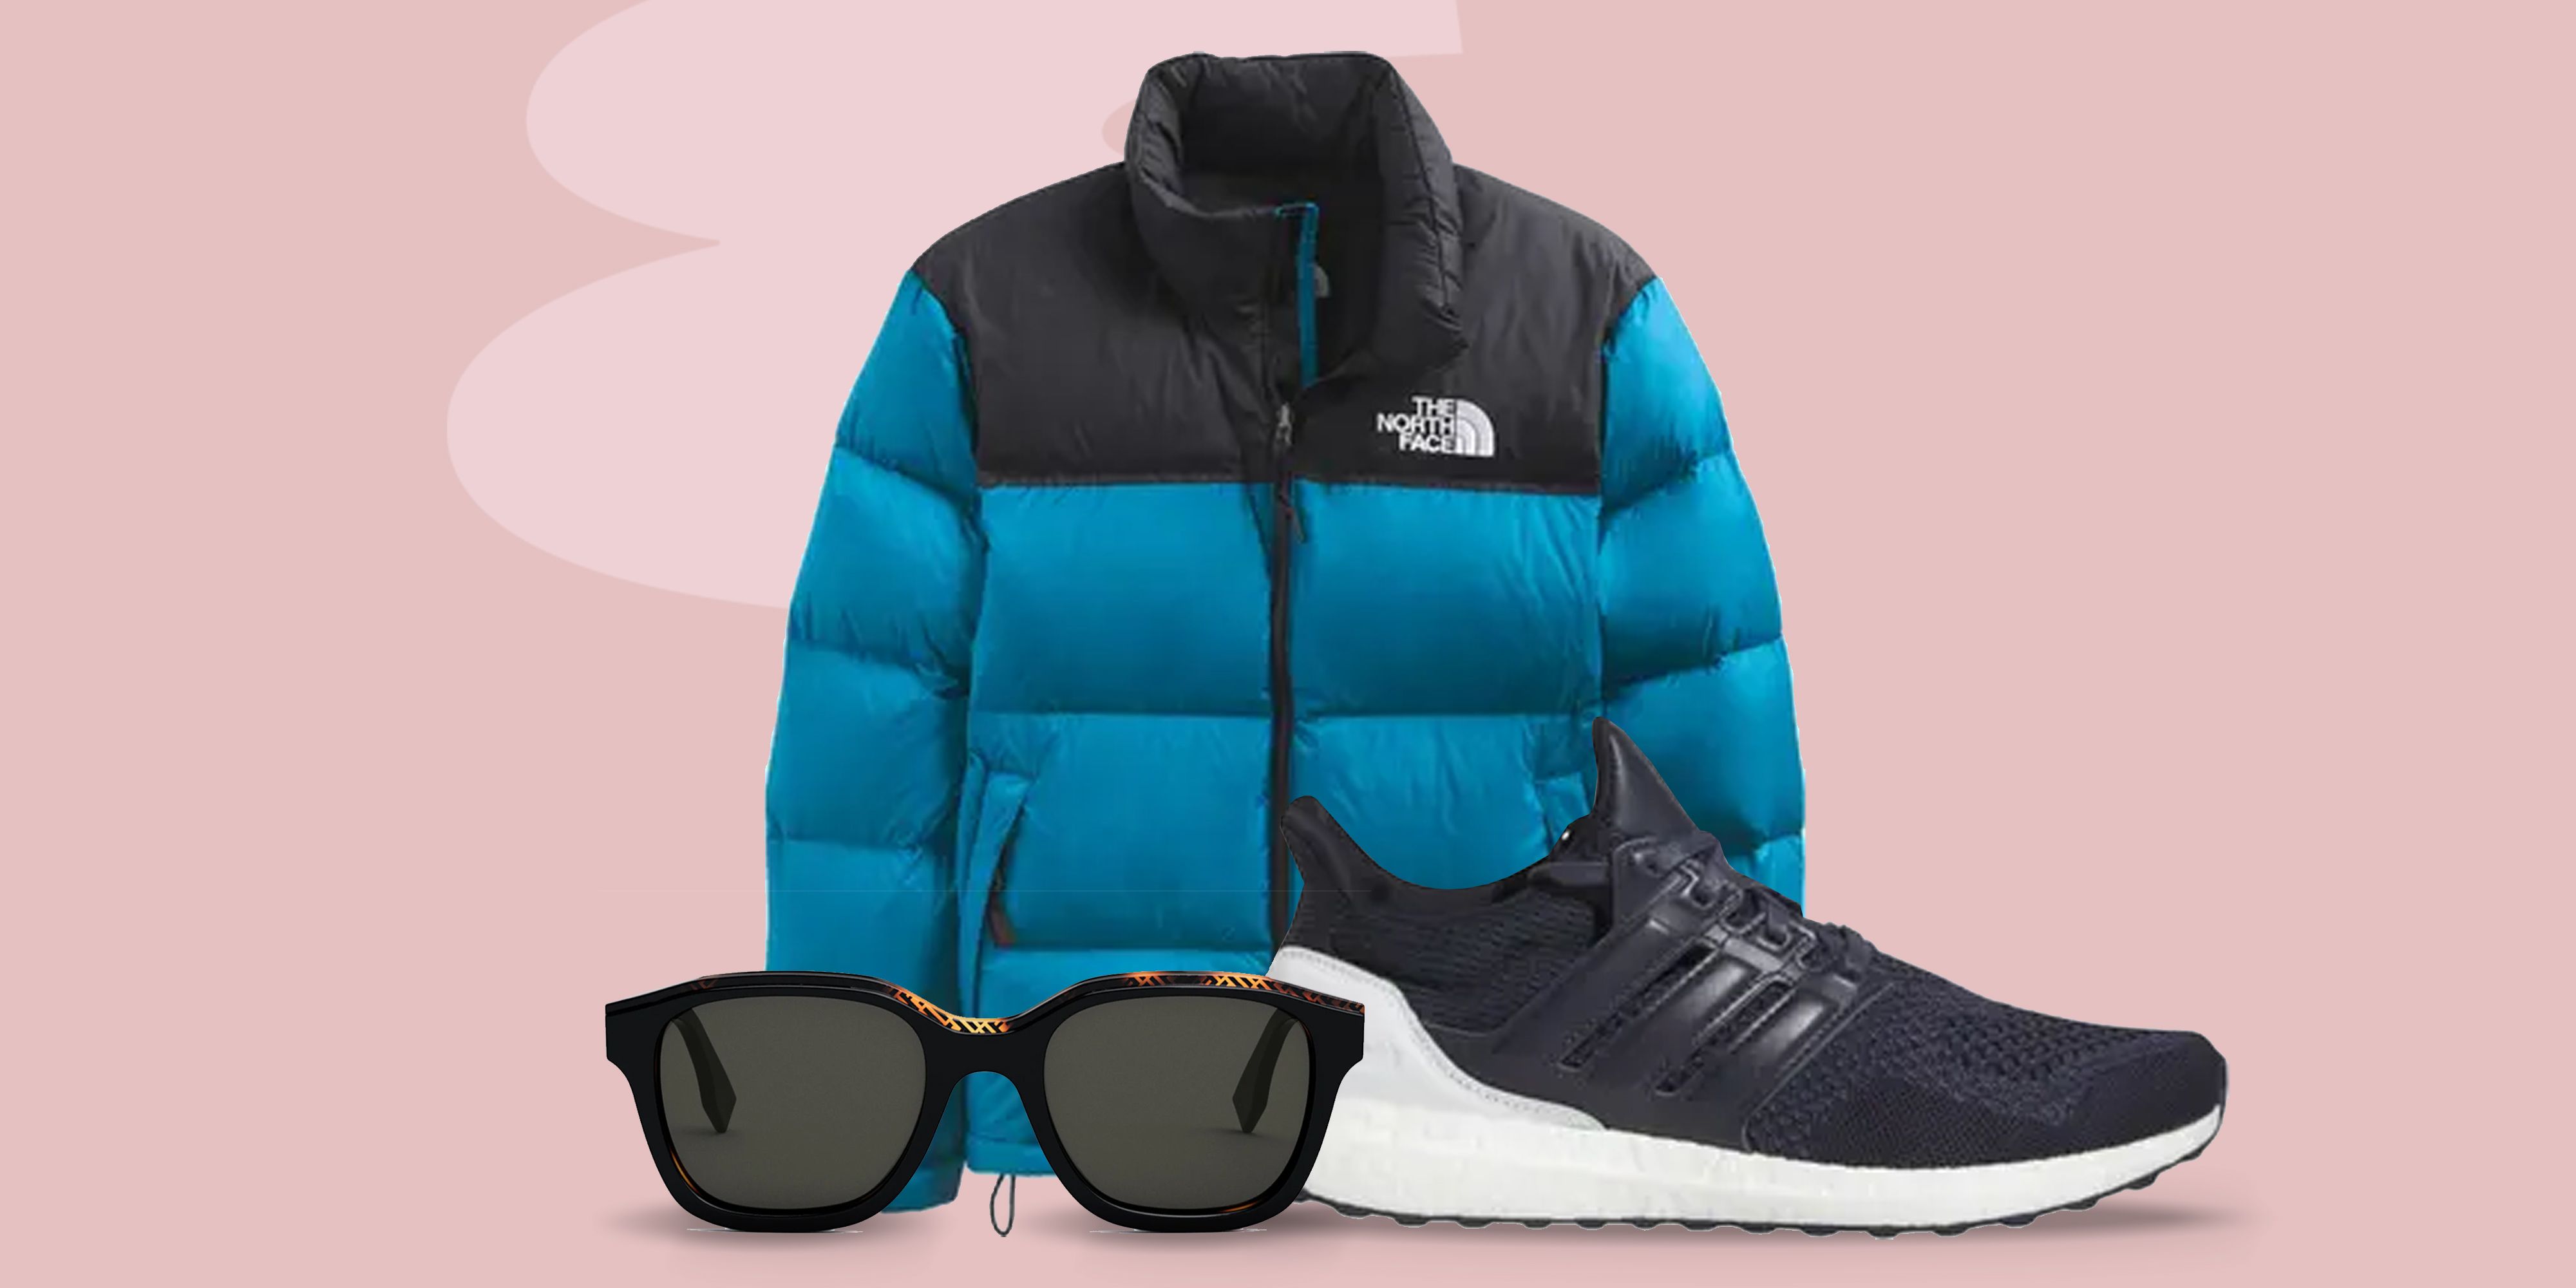 The 23 Best Menswear Items at Nordstrom's Cyber Monday Sale